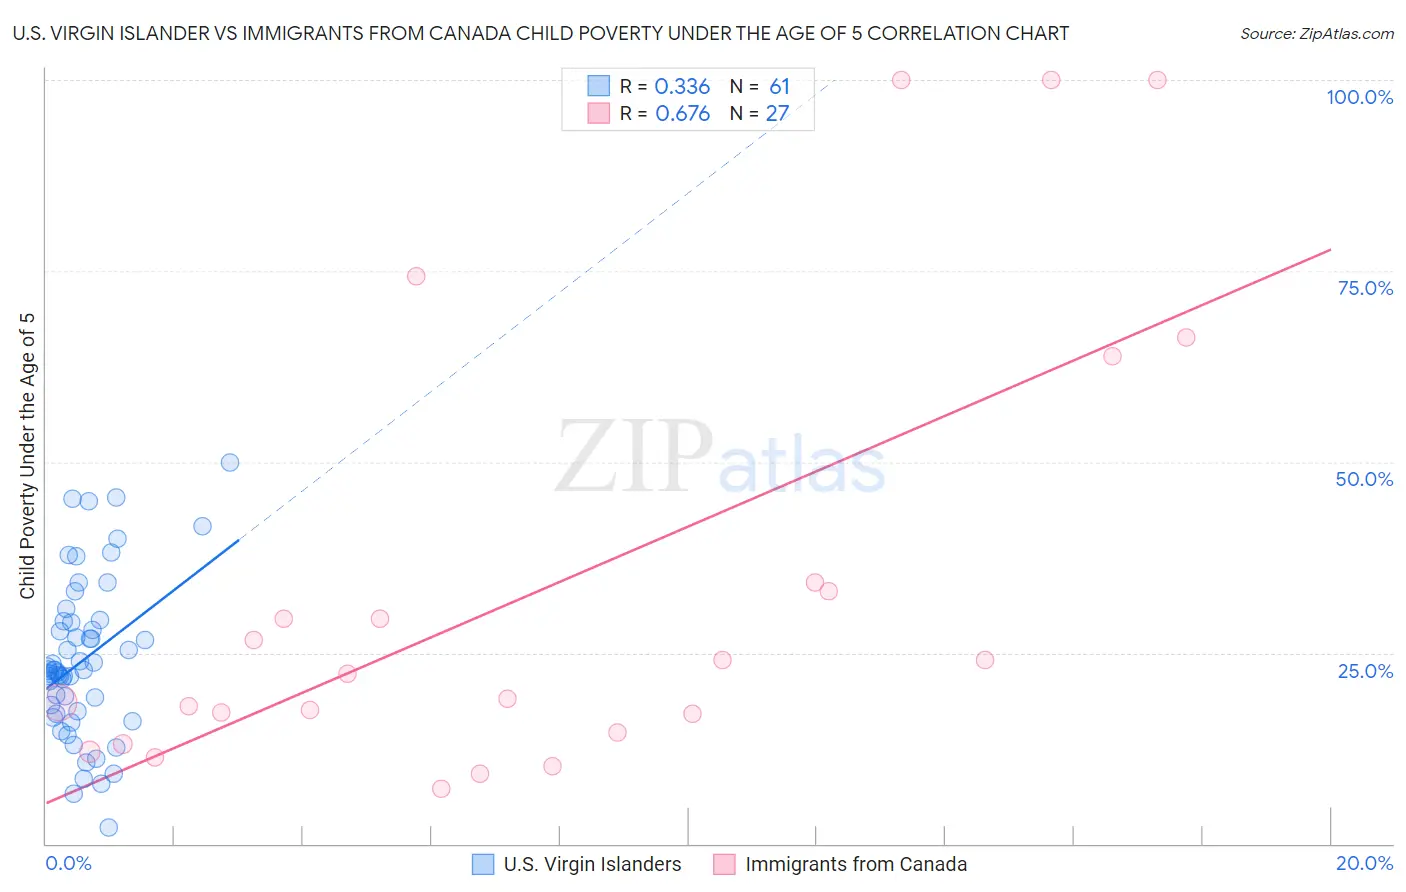 U.S. Virgin Islander vs Immigrants from Canada Child Poverty Under the Age of 5